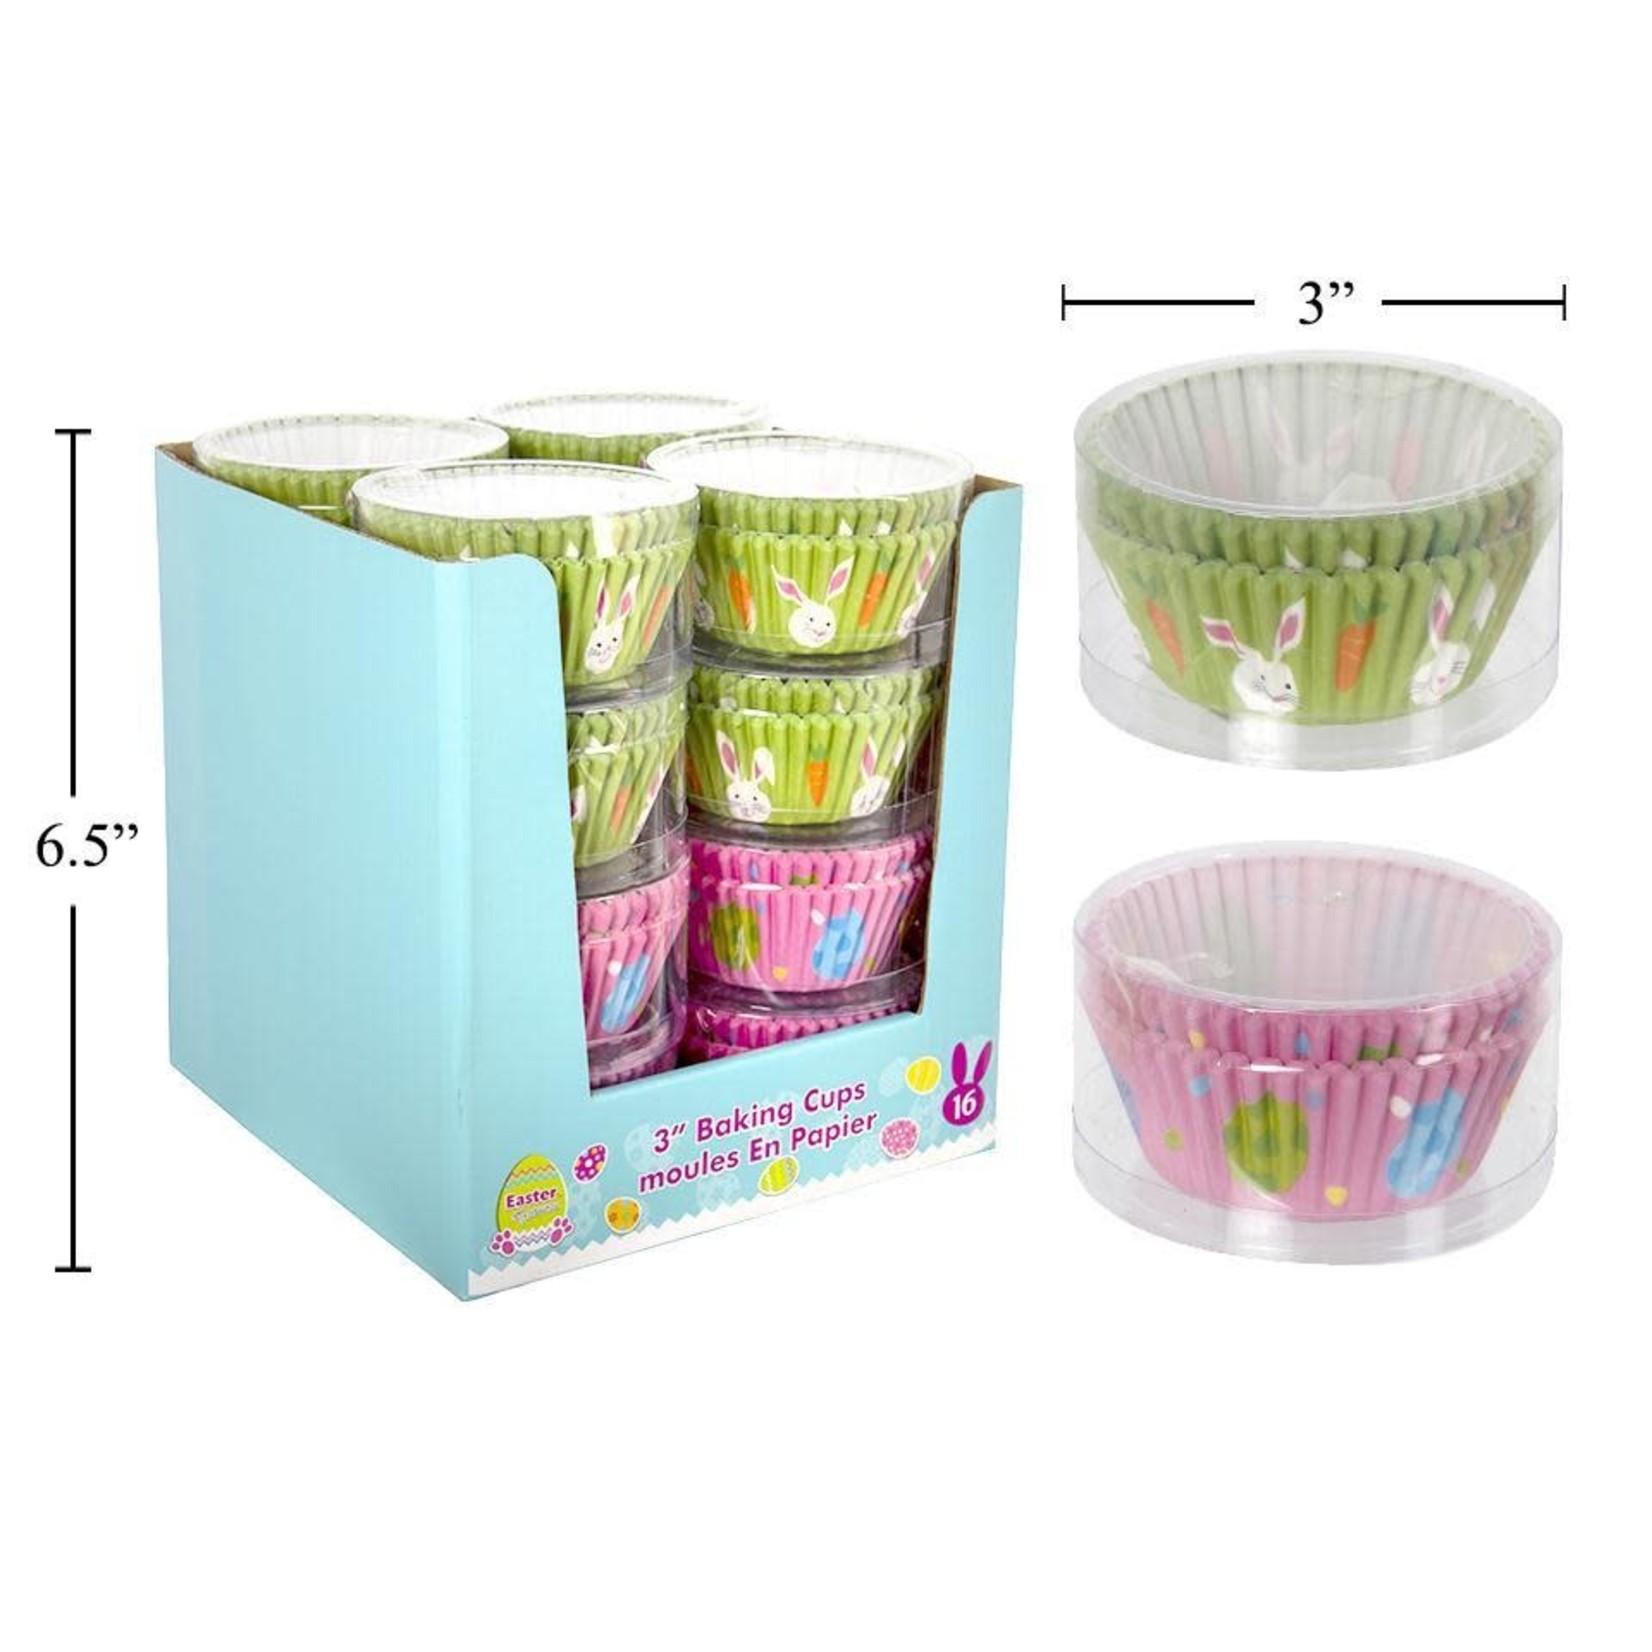 EASTER BAKING CUPS